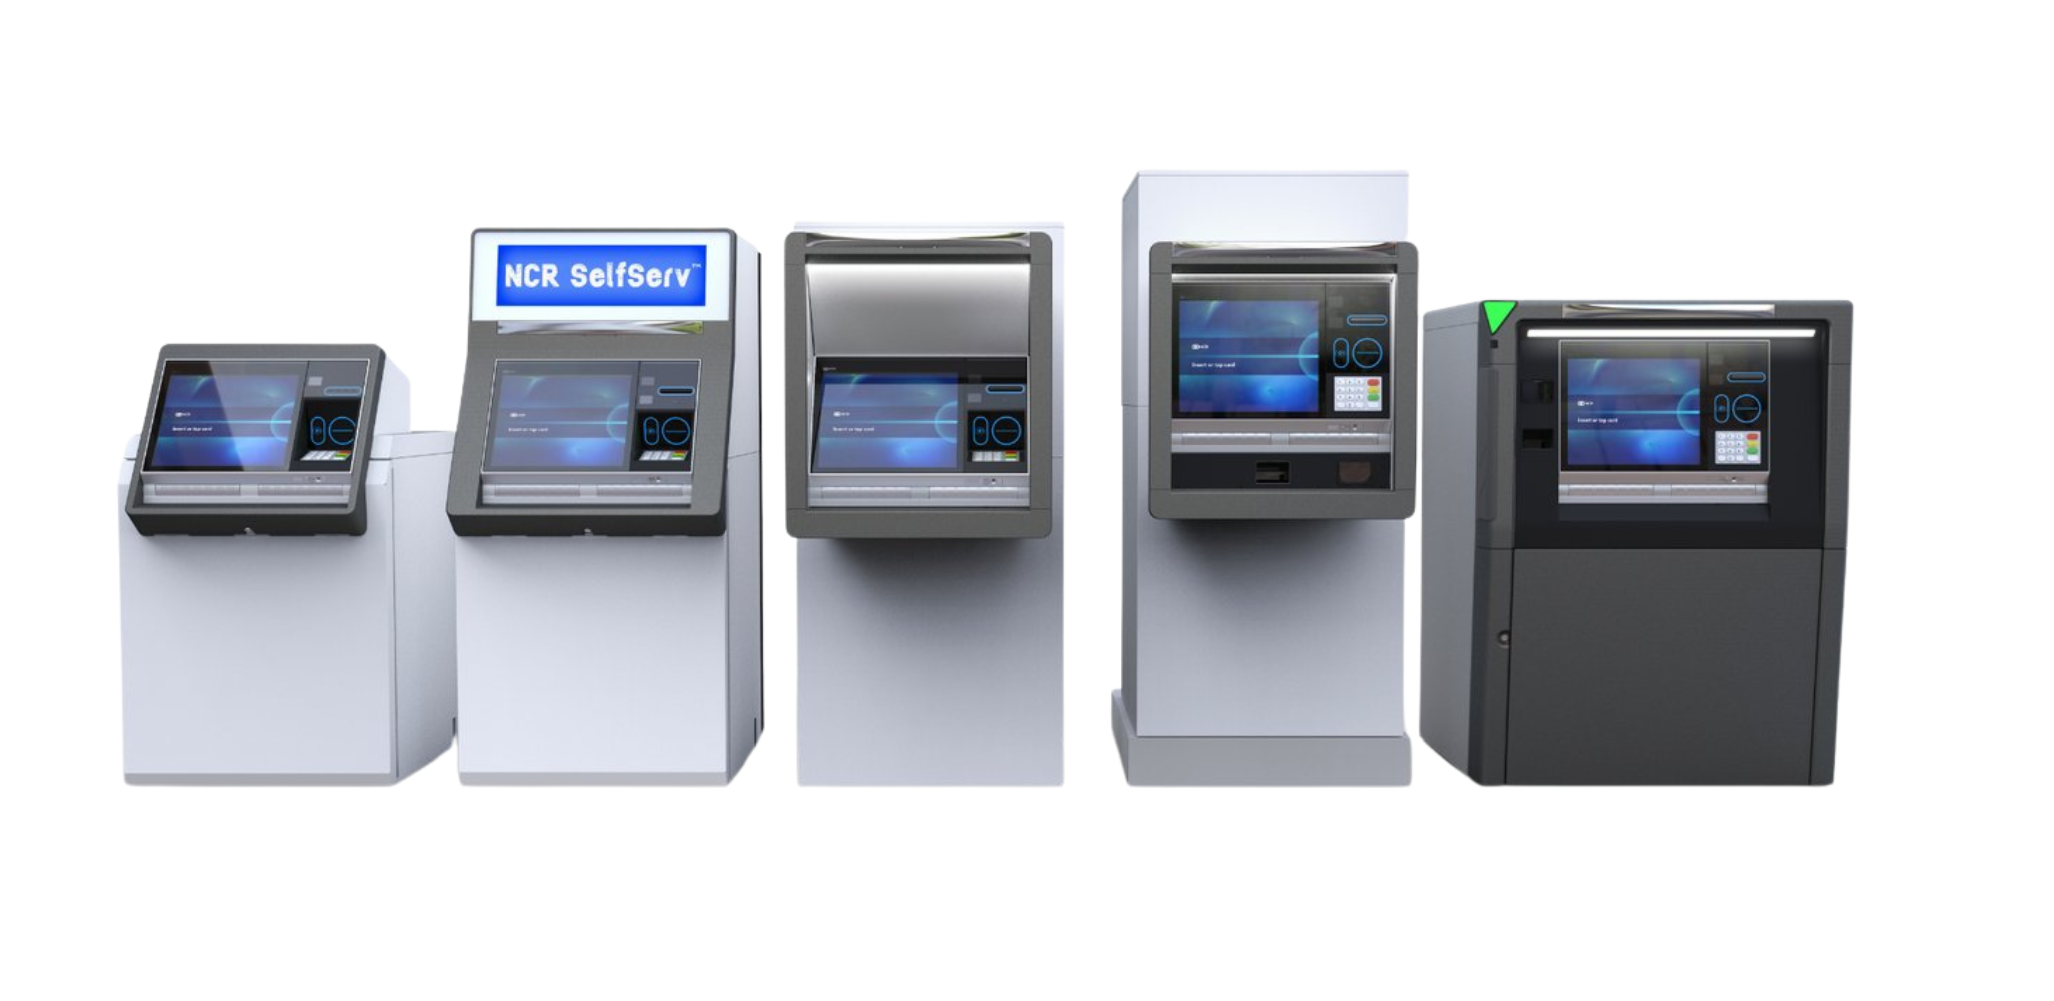 Picture of 5 varying ATM models